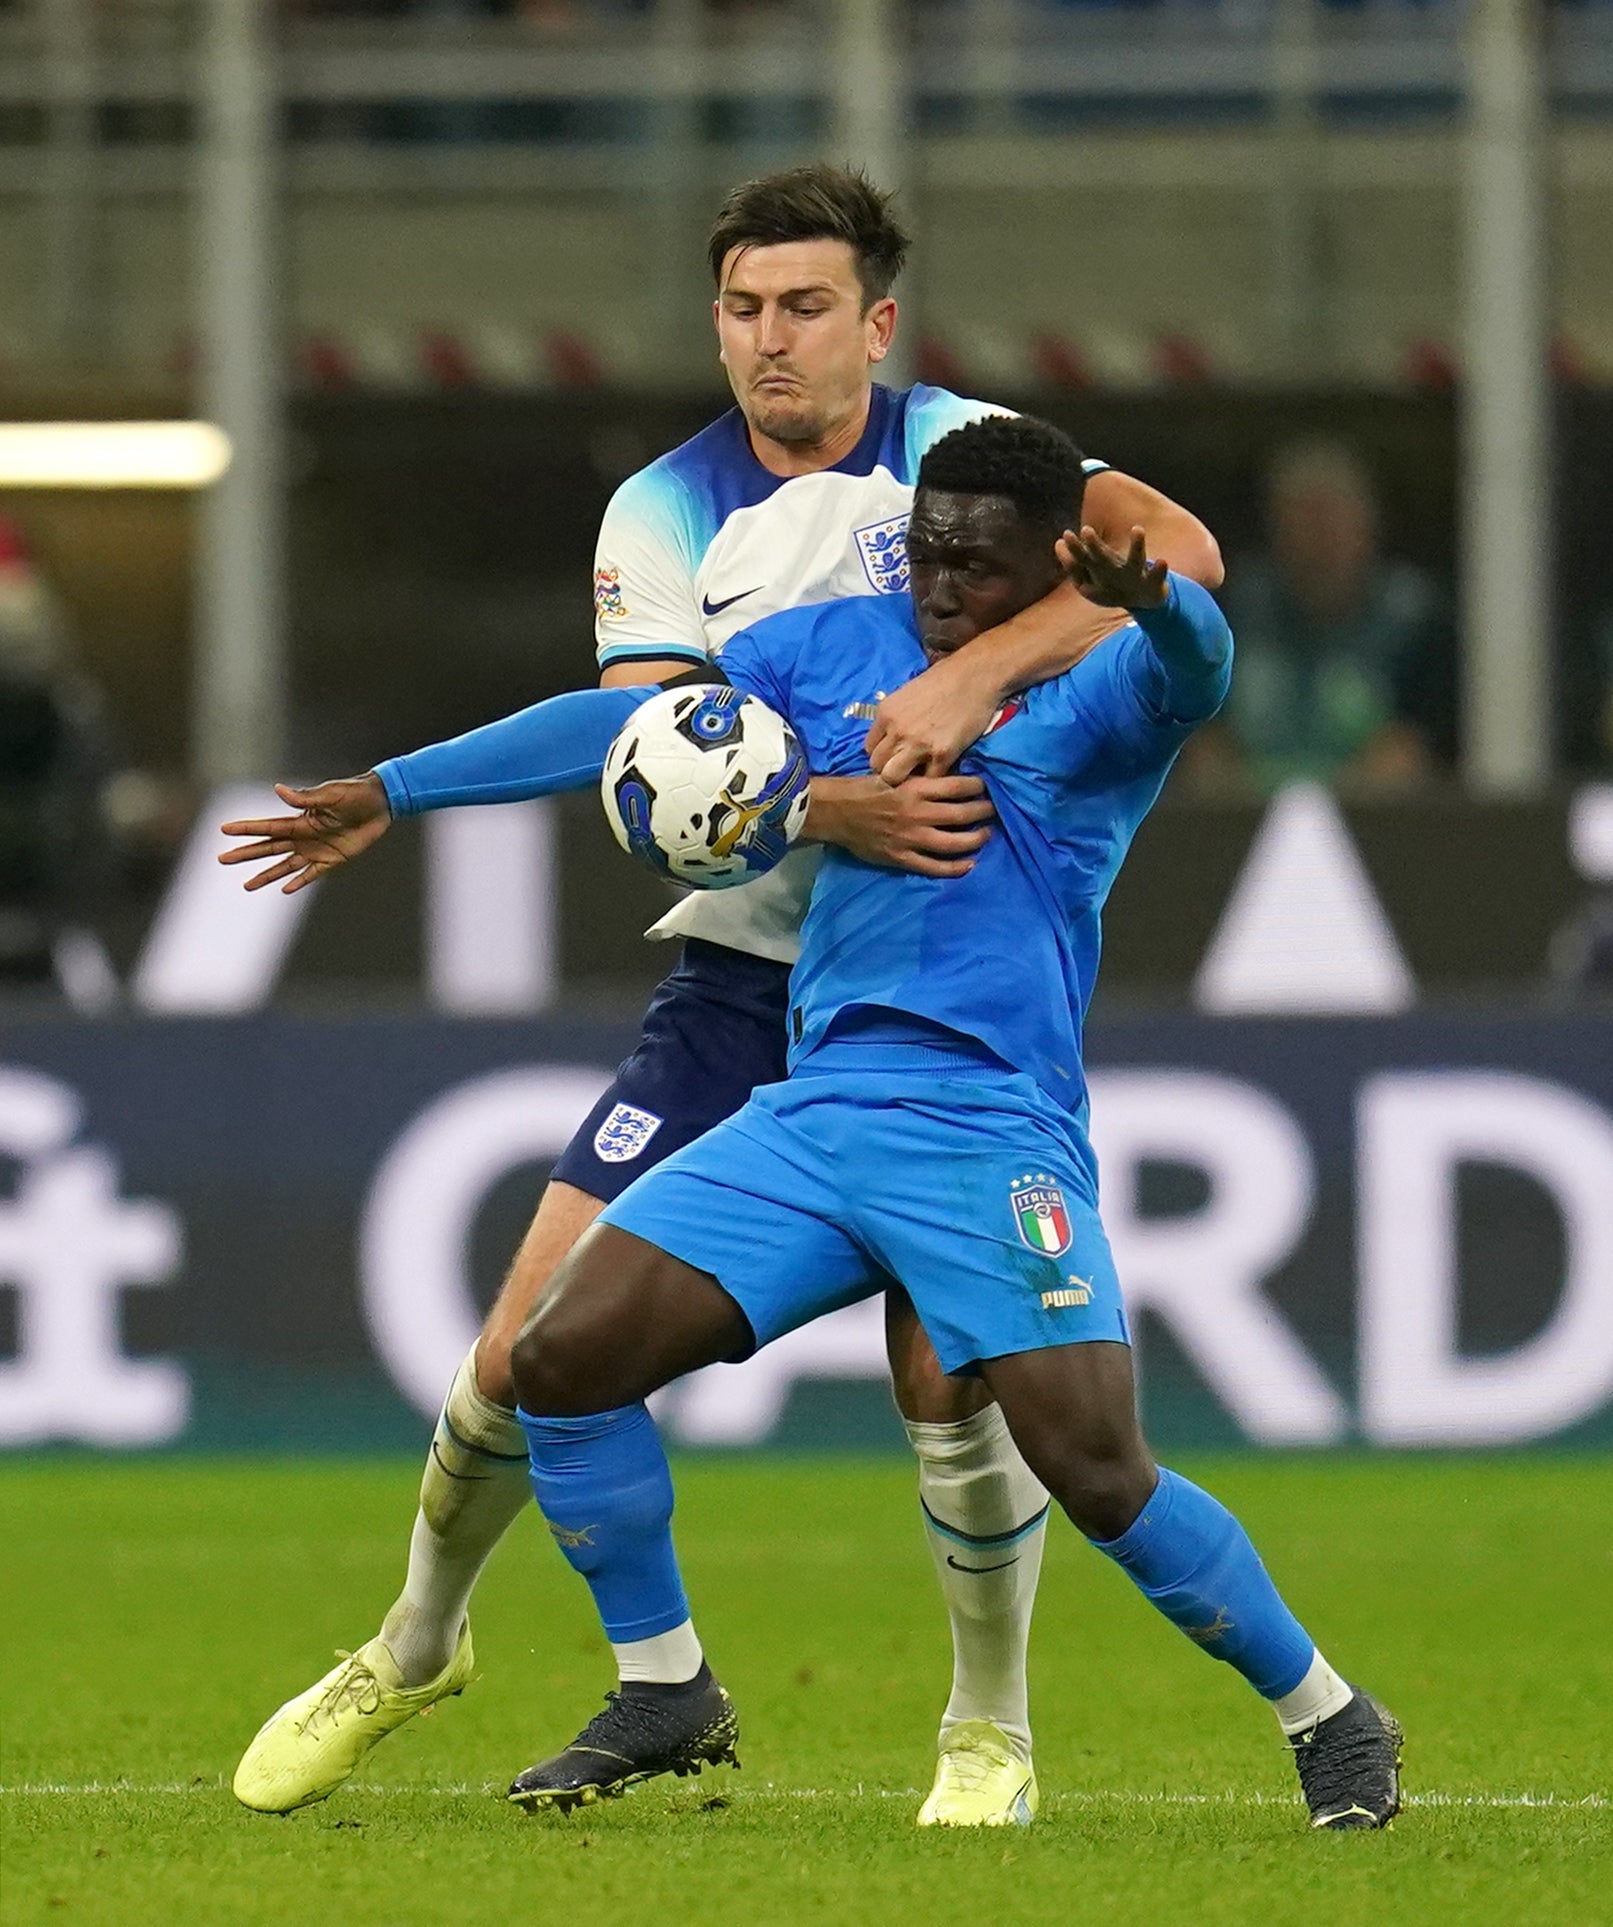 Harry Maguire started against Italy despite losing his place at Manchester United (Nick Potts/PA).